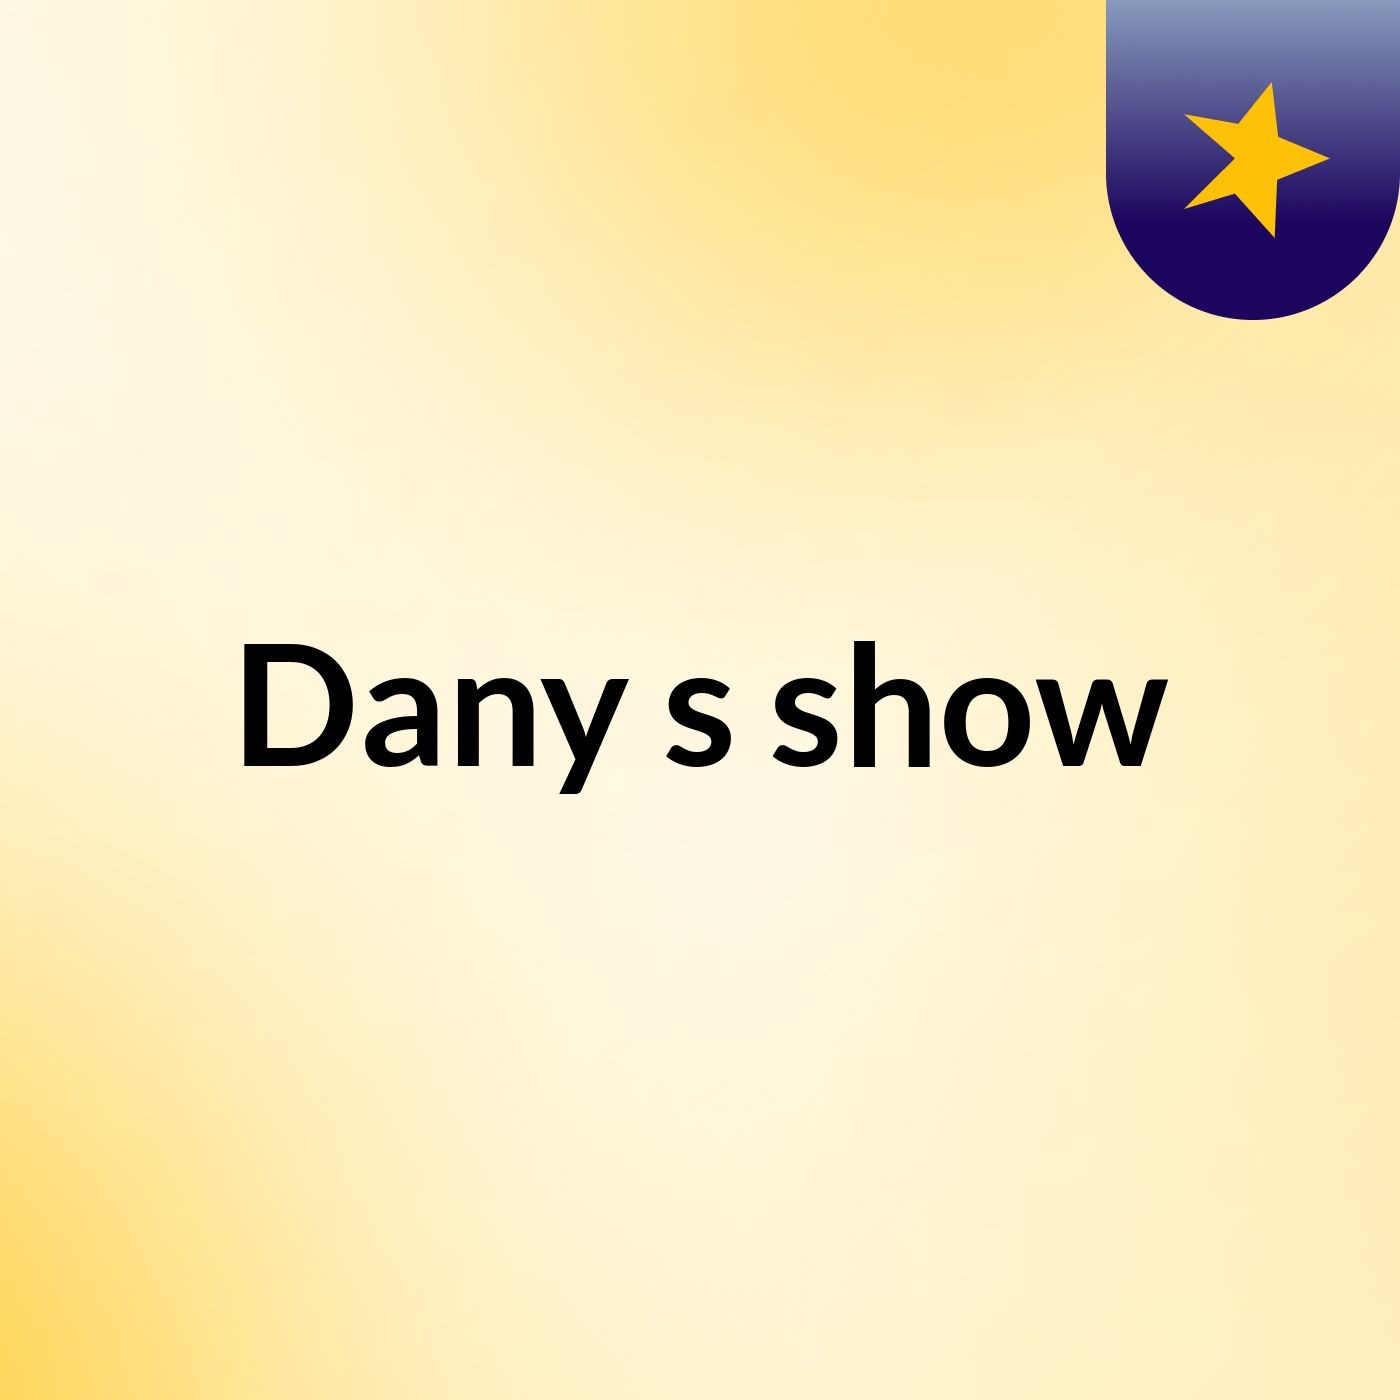 Dany's show